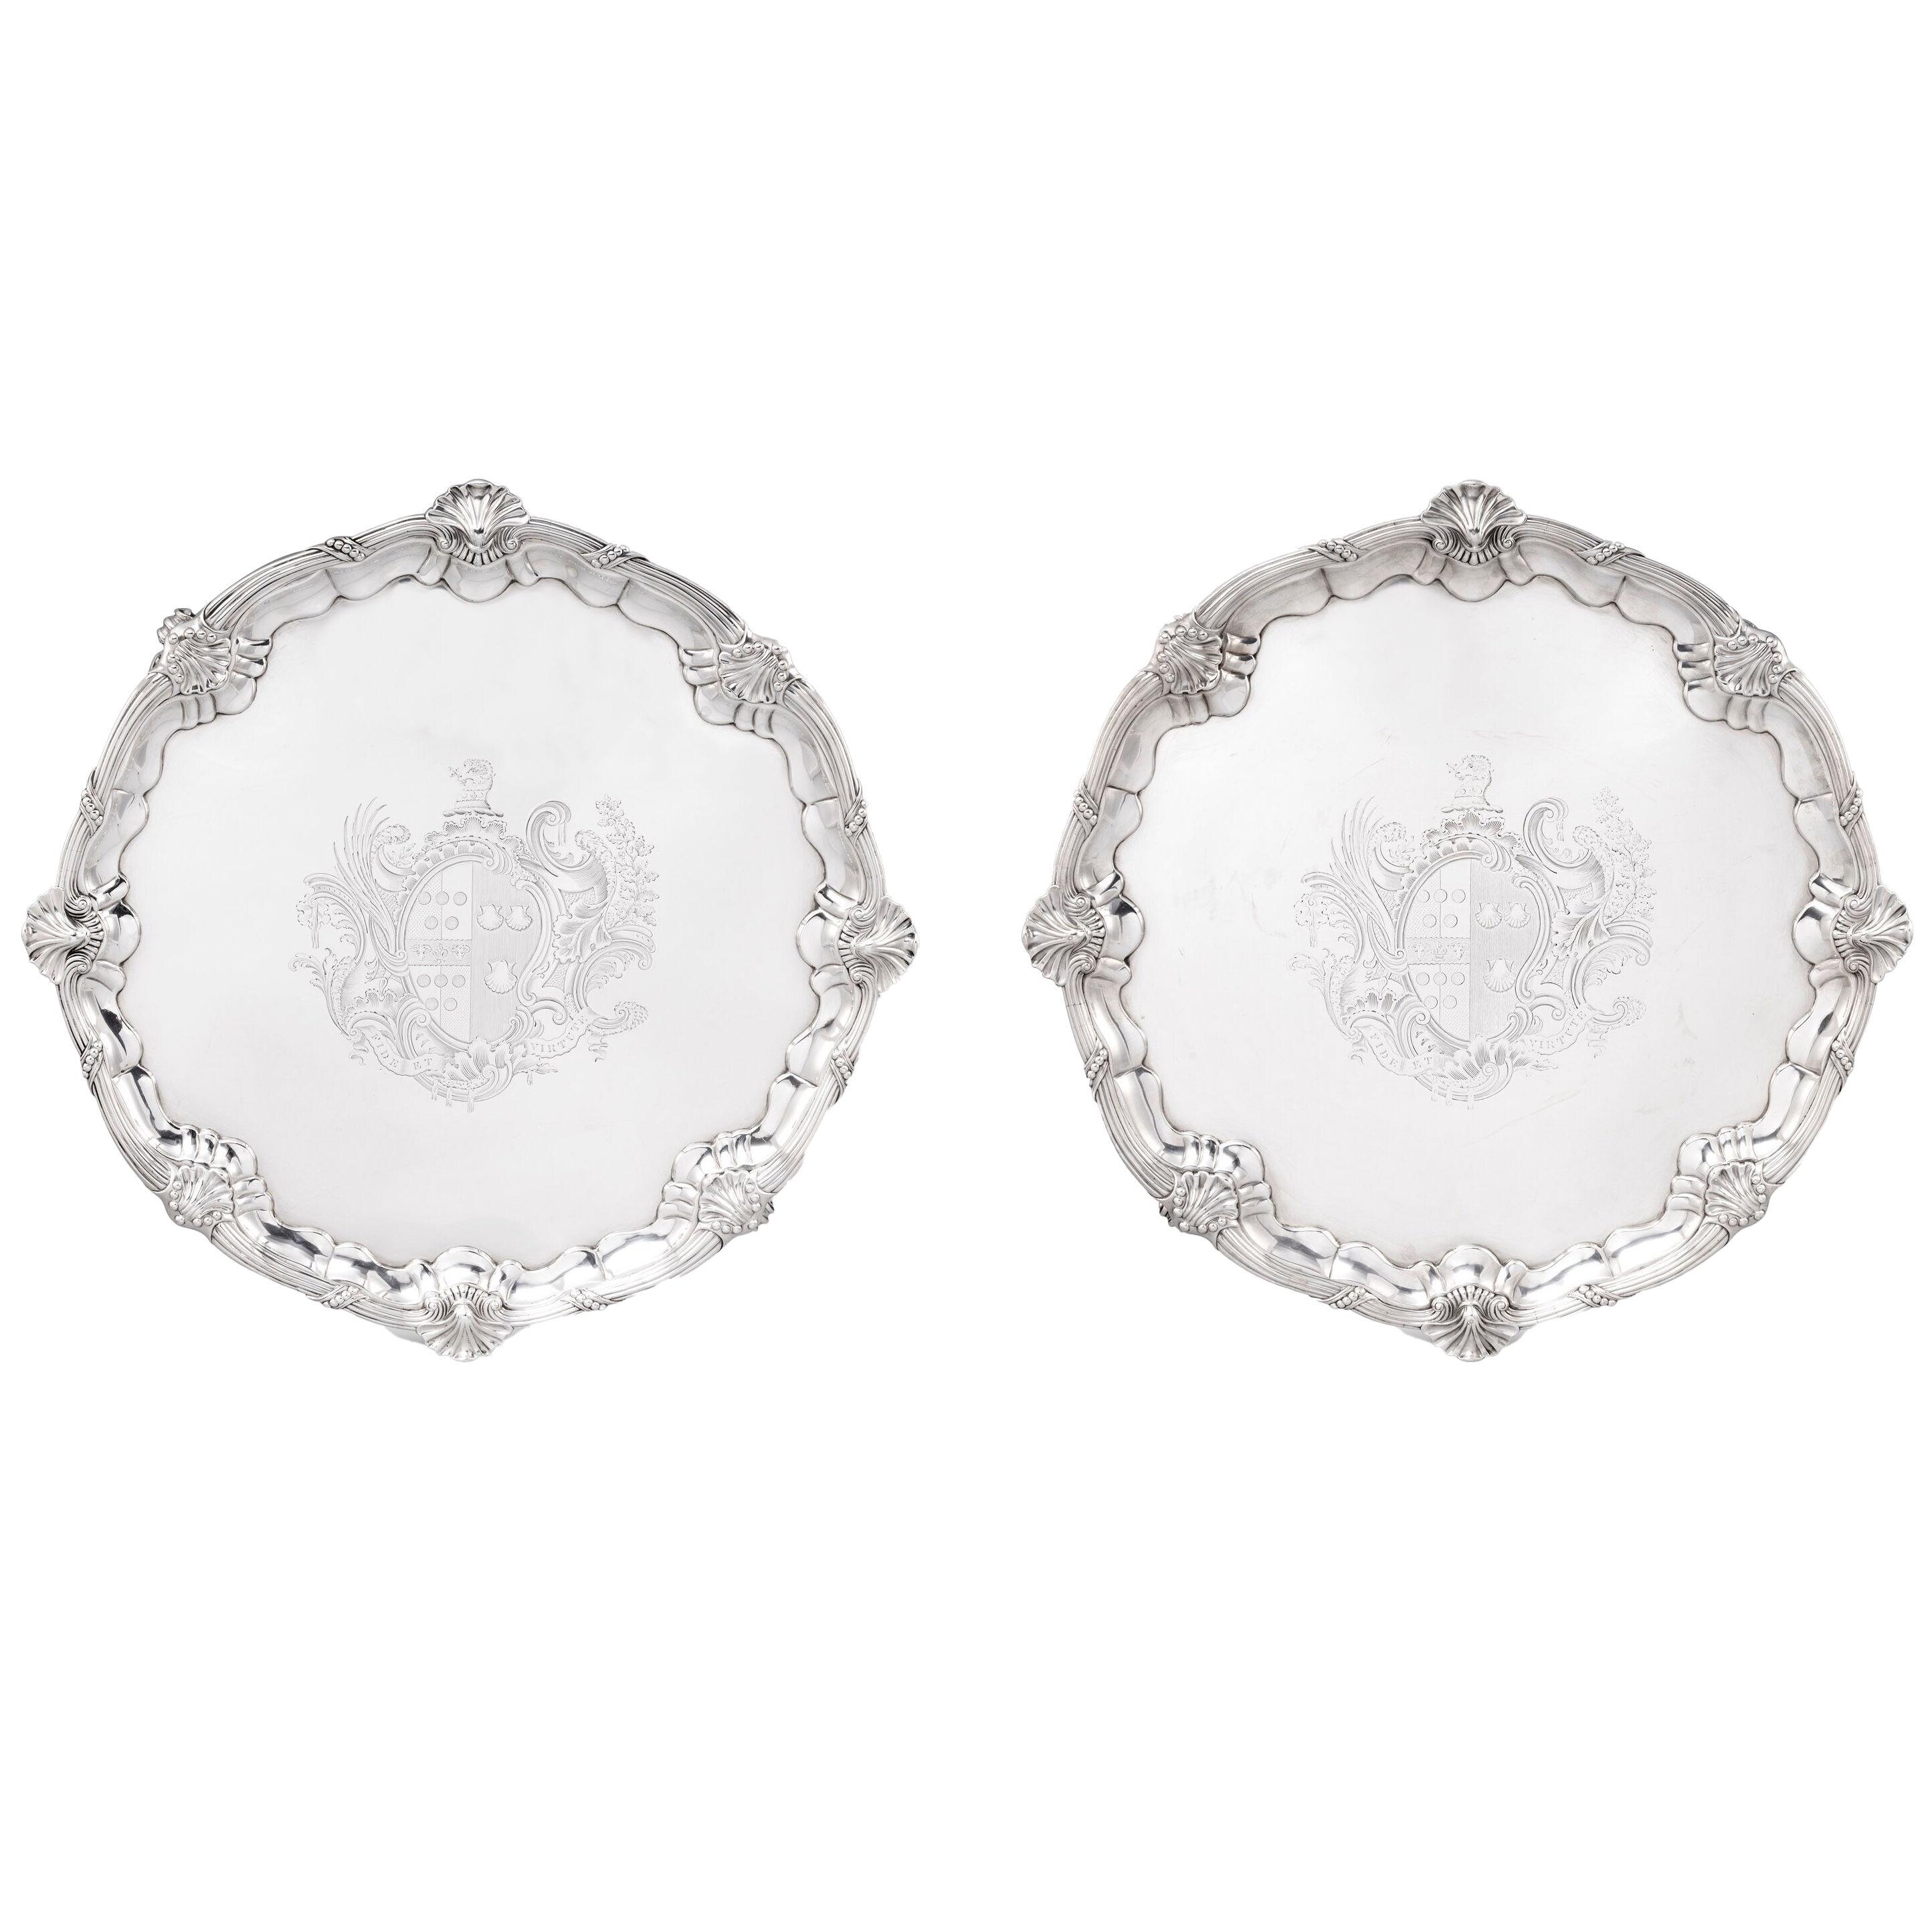  An Exceptionally Large Pair of George IV Salvers